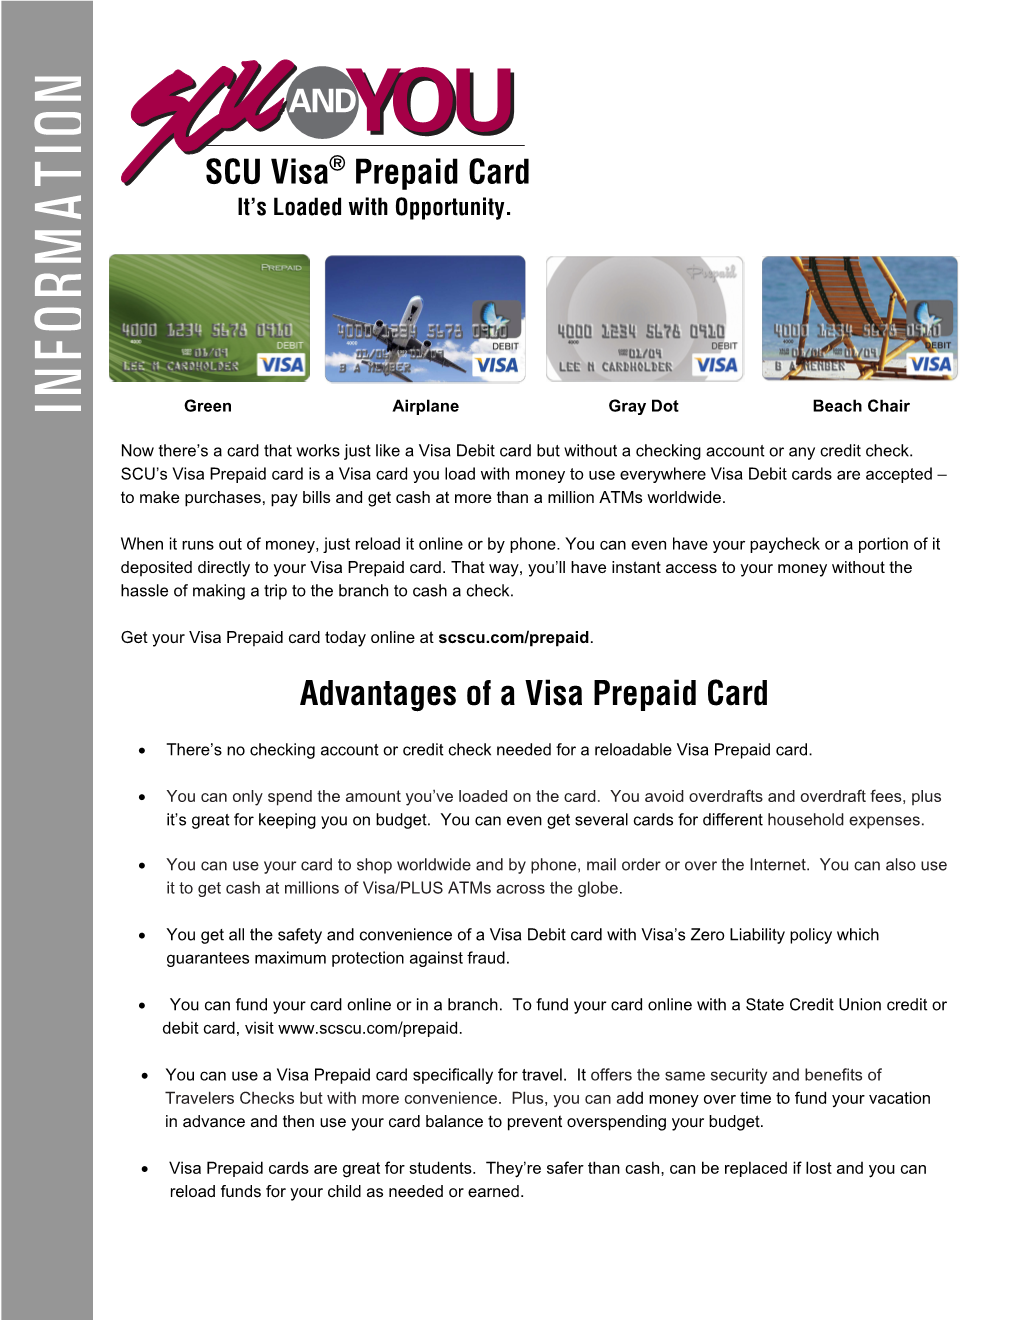 SCU Visa® Prepaid Card It’S Loaded with Opportunity